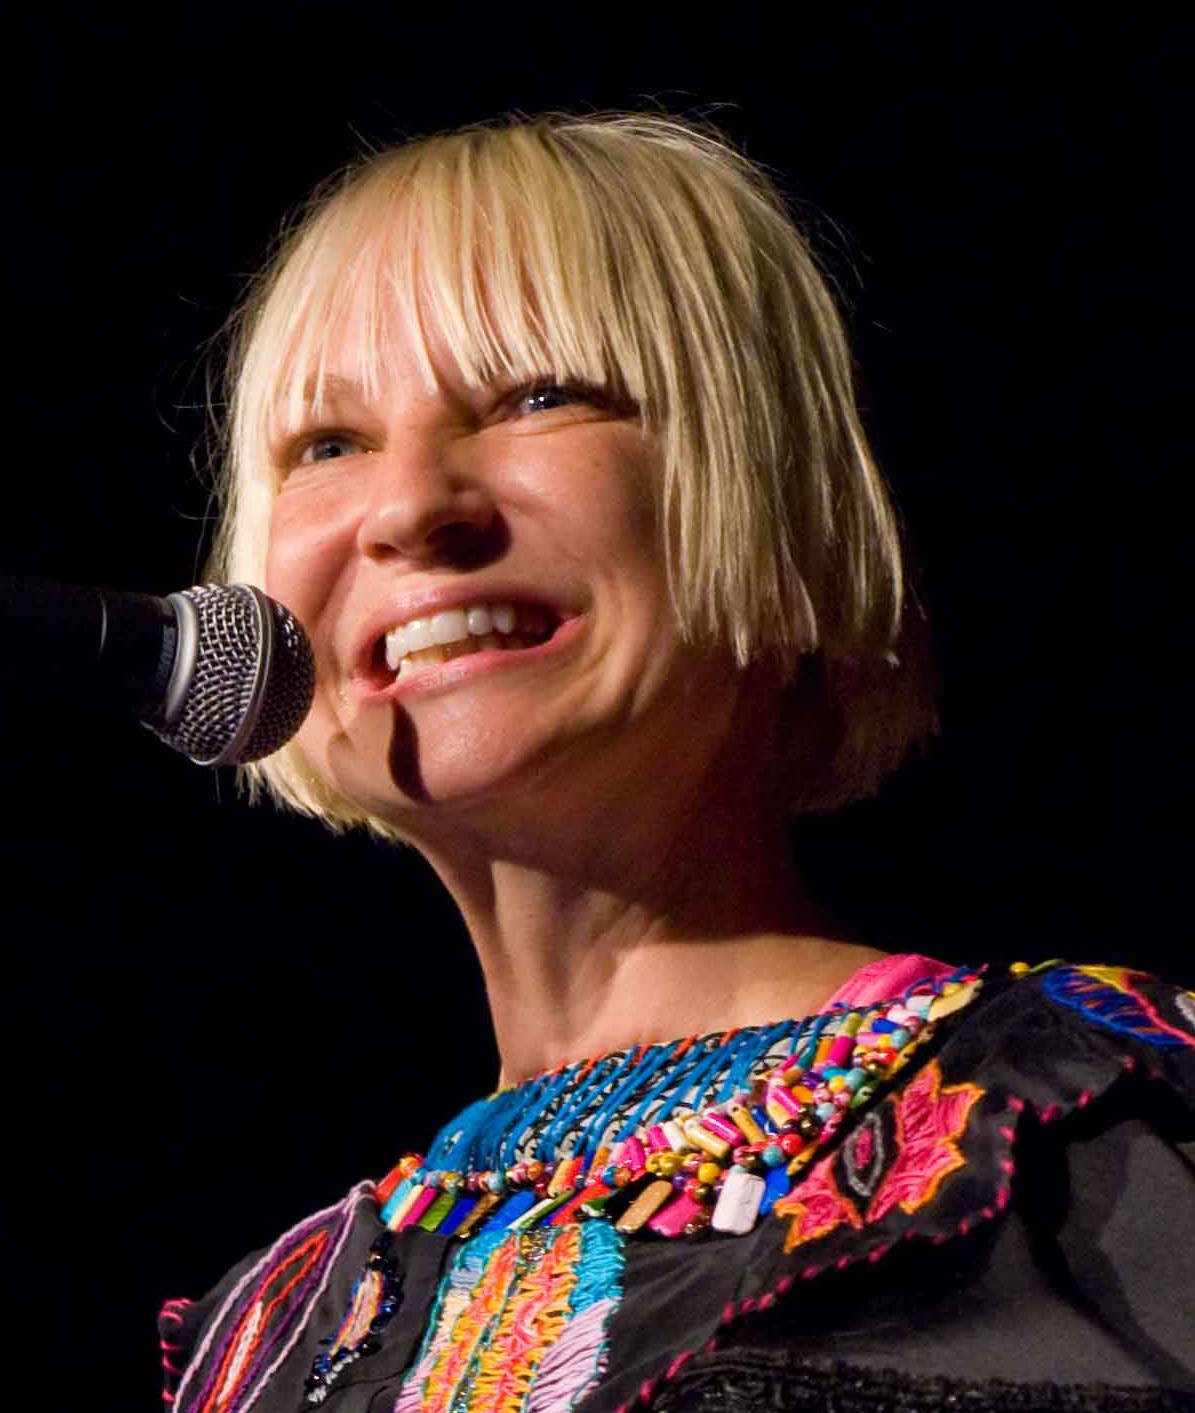 How tall is Sia?